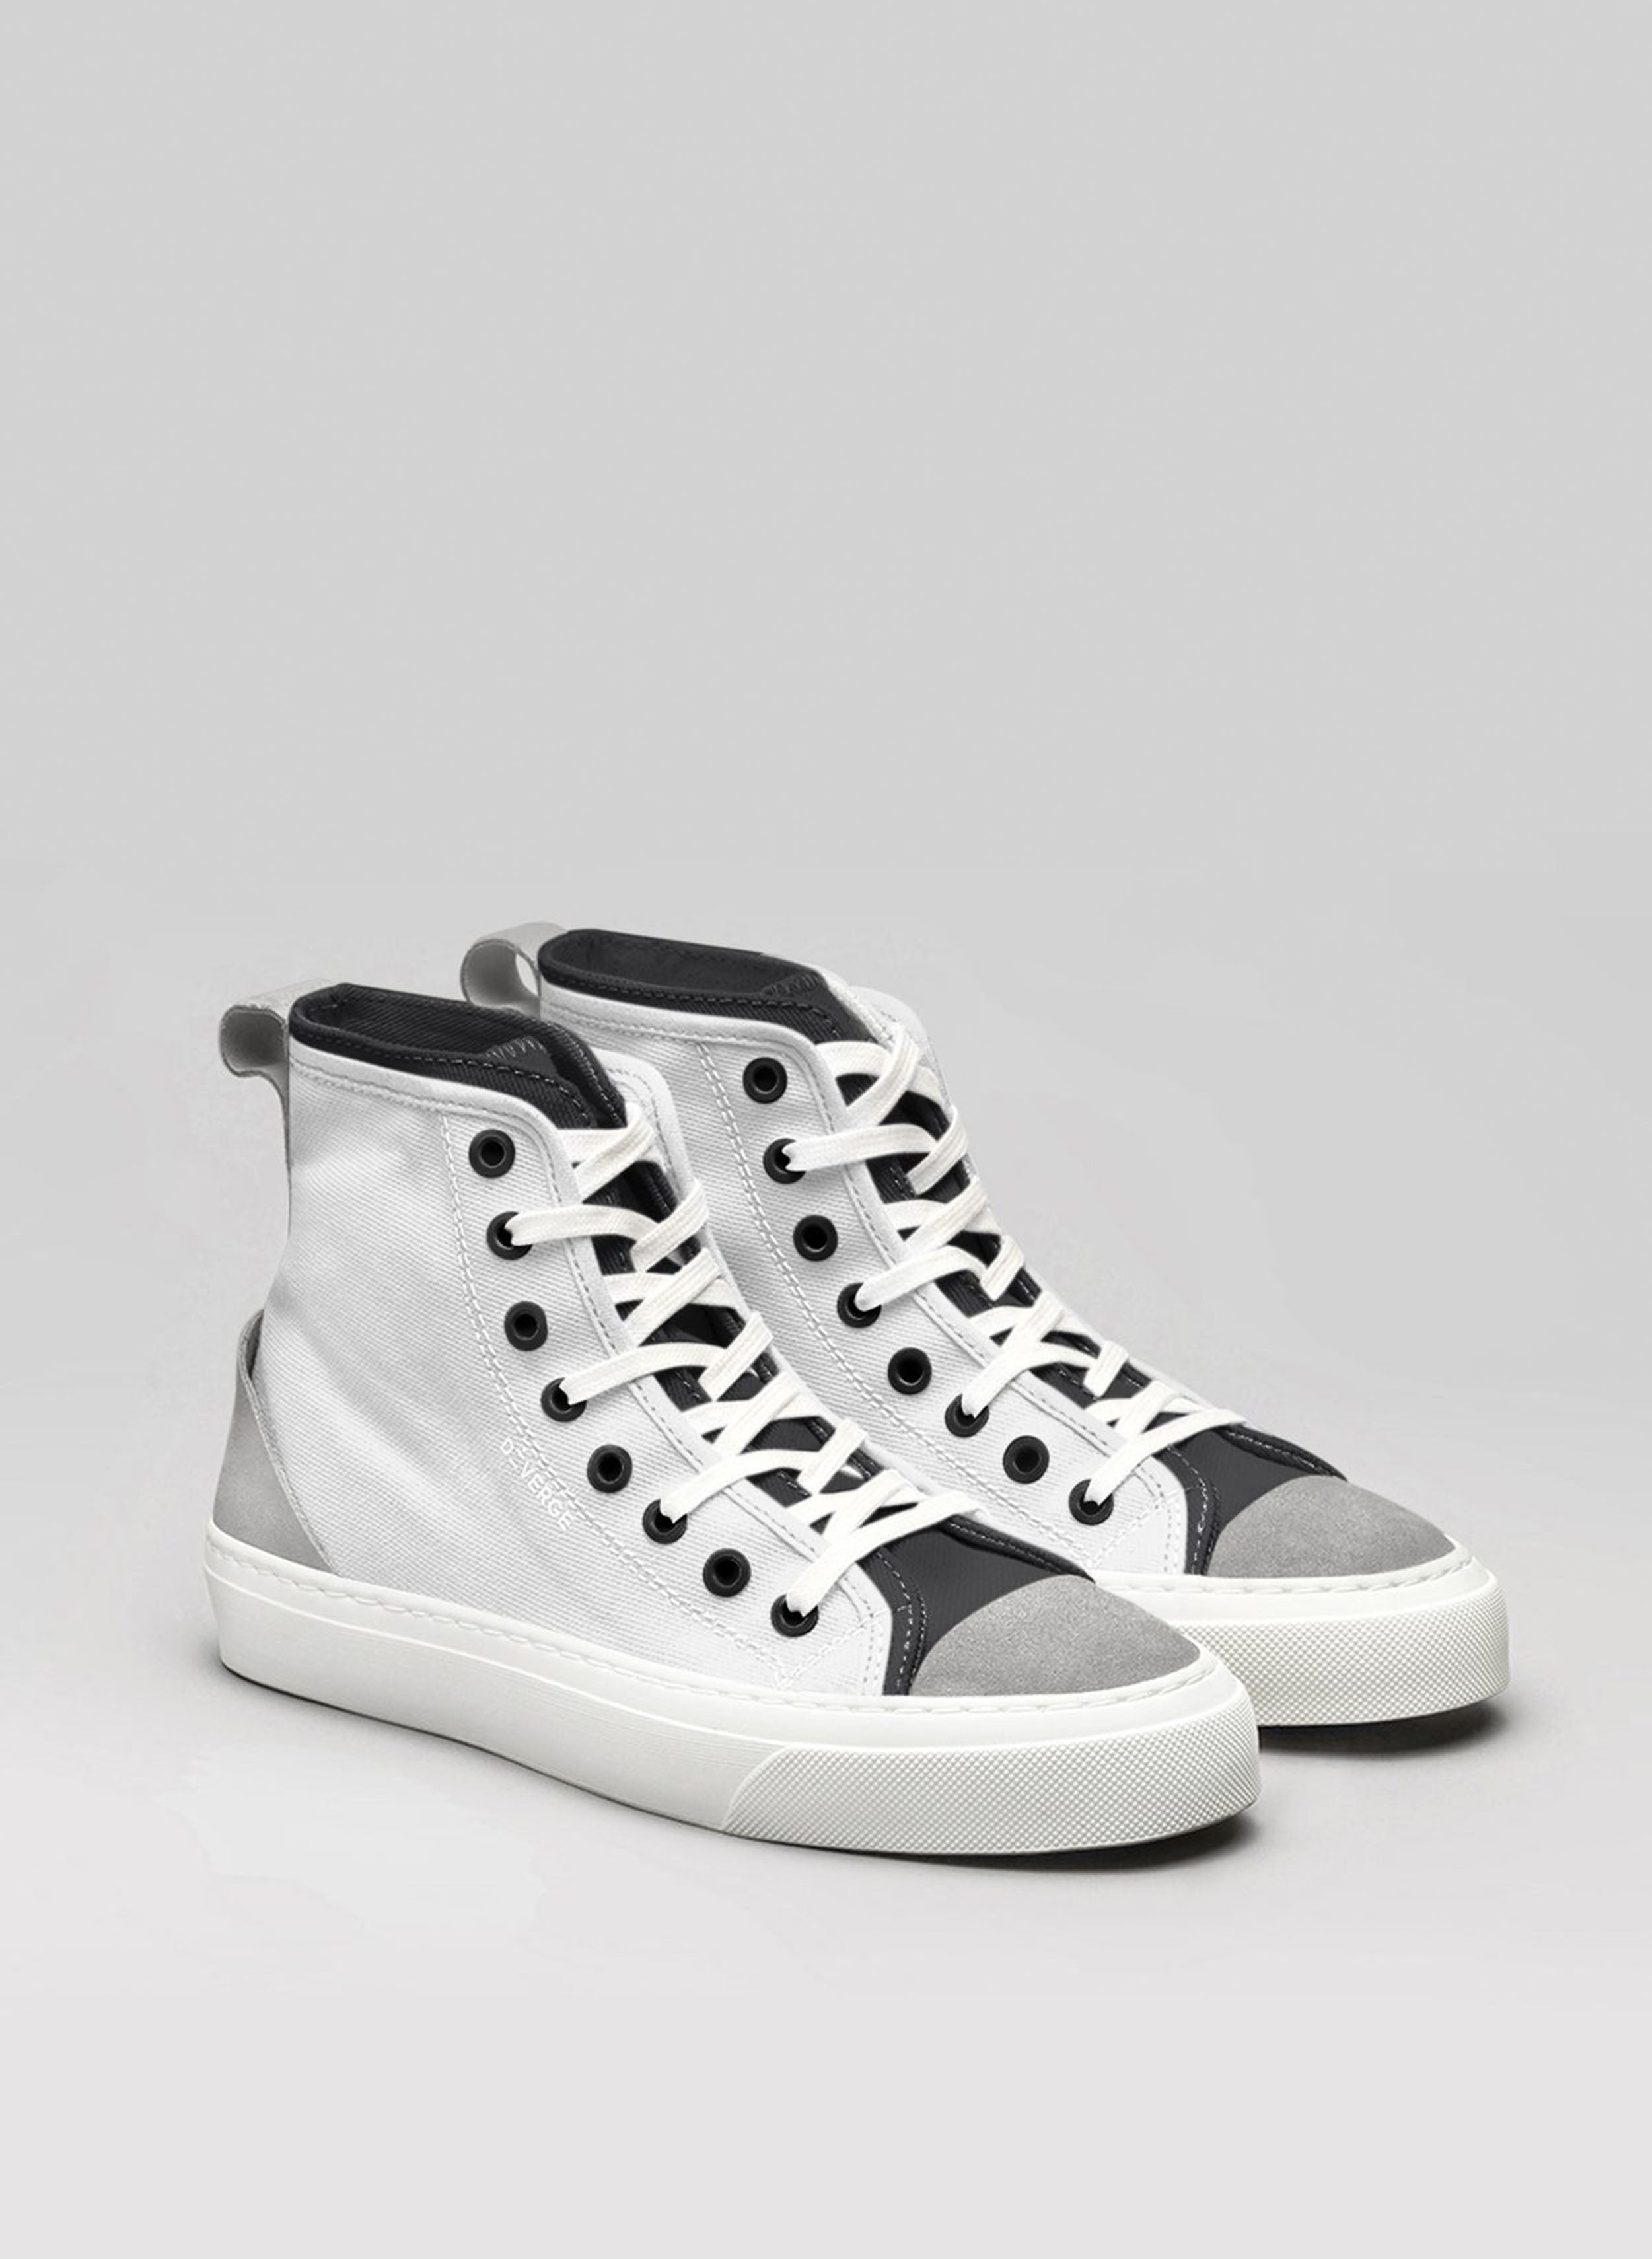 A pair of white and black custom high-top sneakers from Diverge.